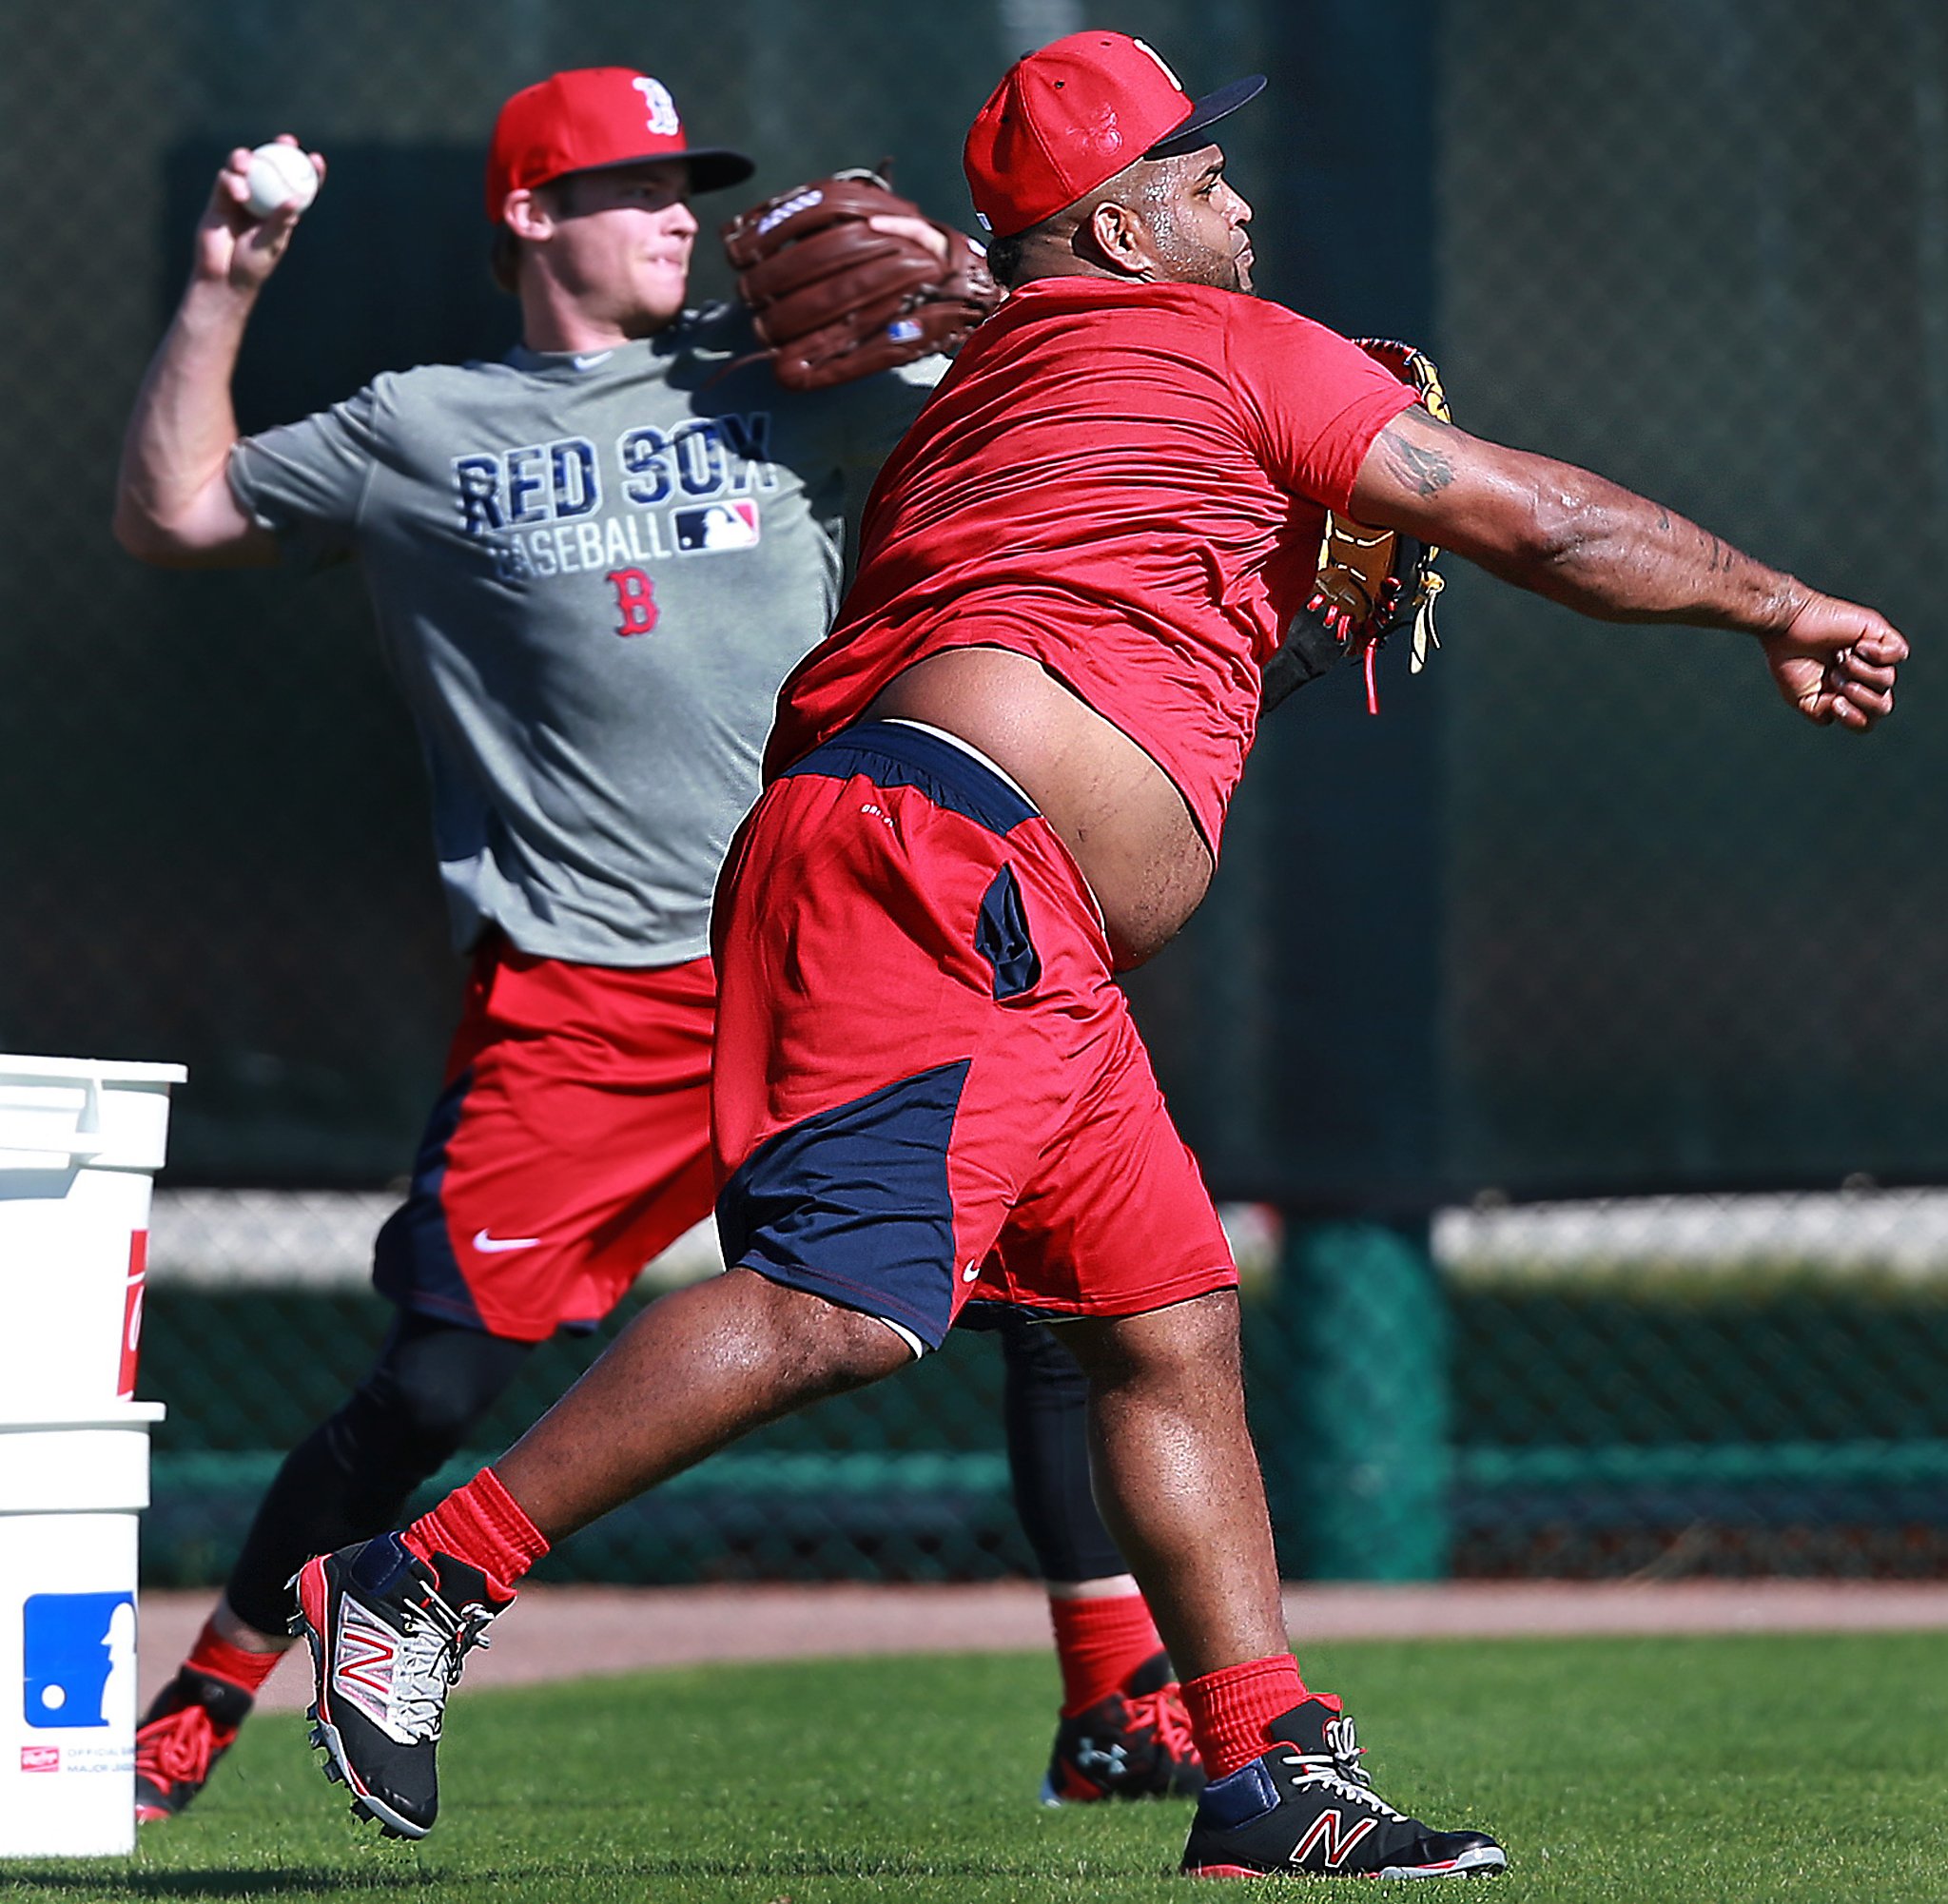 Pablo Sandoval showed up overweight to spring training and everyone is